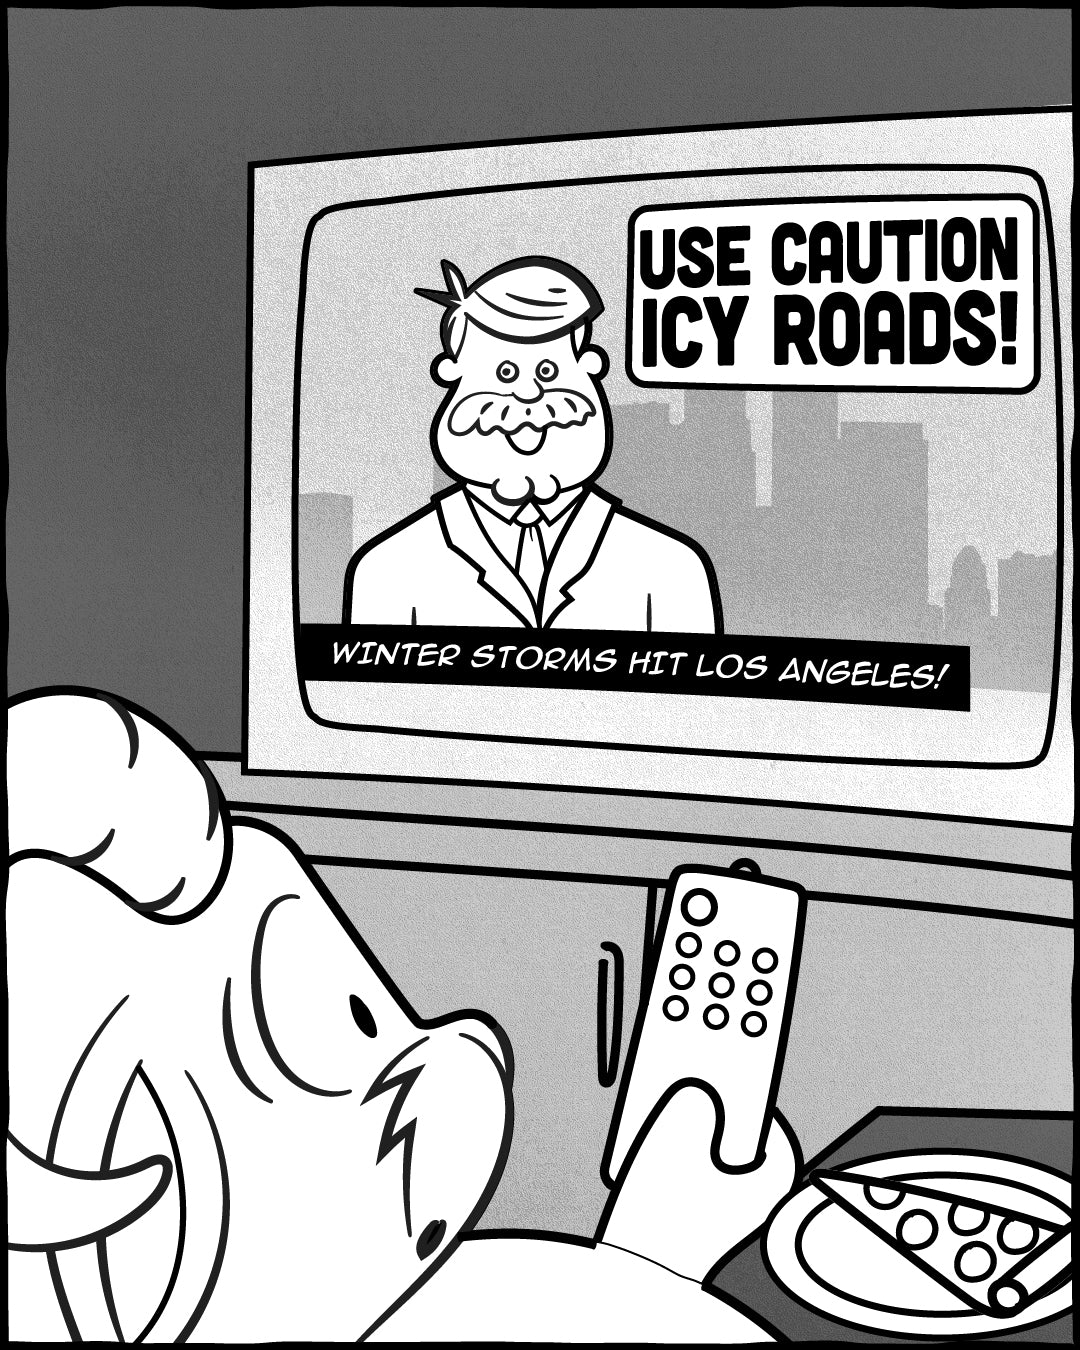 Page 1, Icy Roads Mount Baldy- No Chains, Snow Problem, The Adventures Of Lambert Comic Series | TRVRS Outdoors